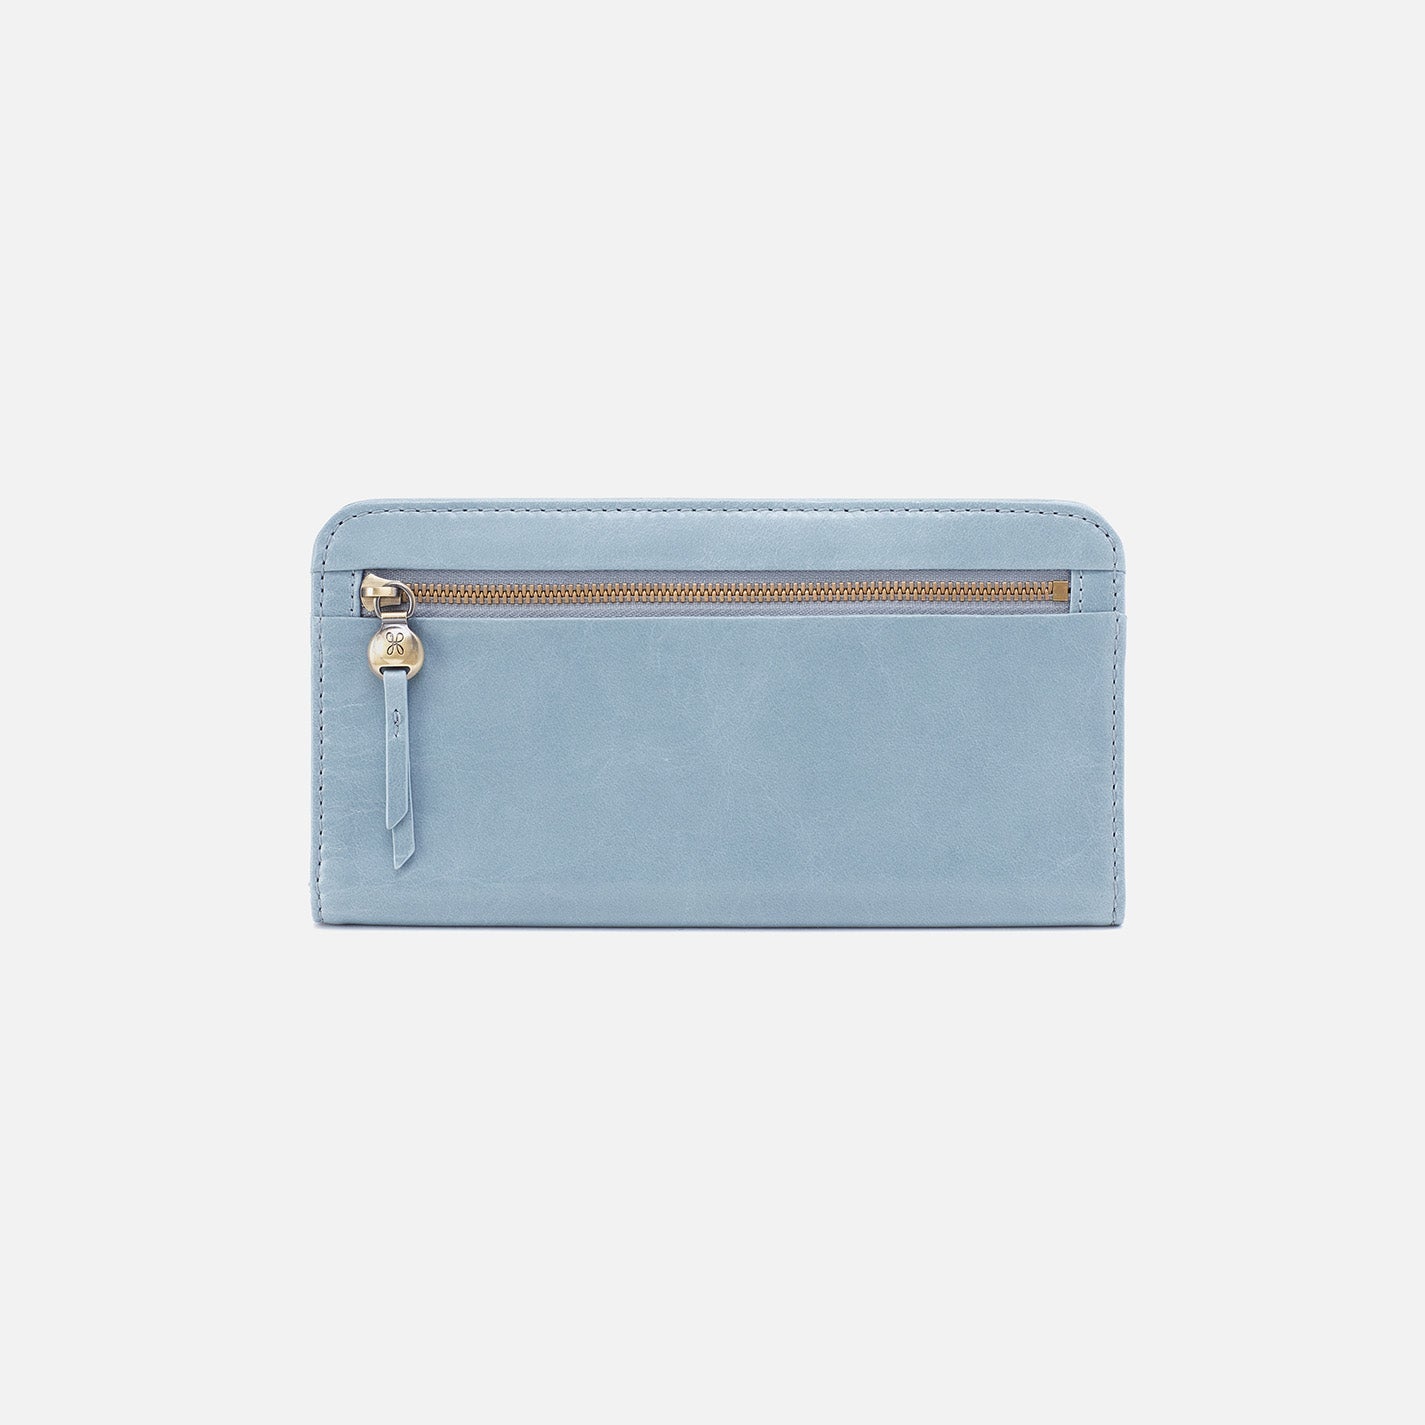 cornflower angle wallet on a white background.